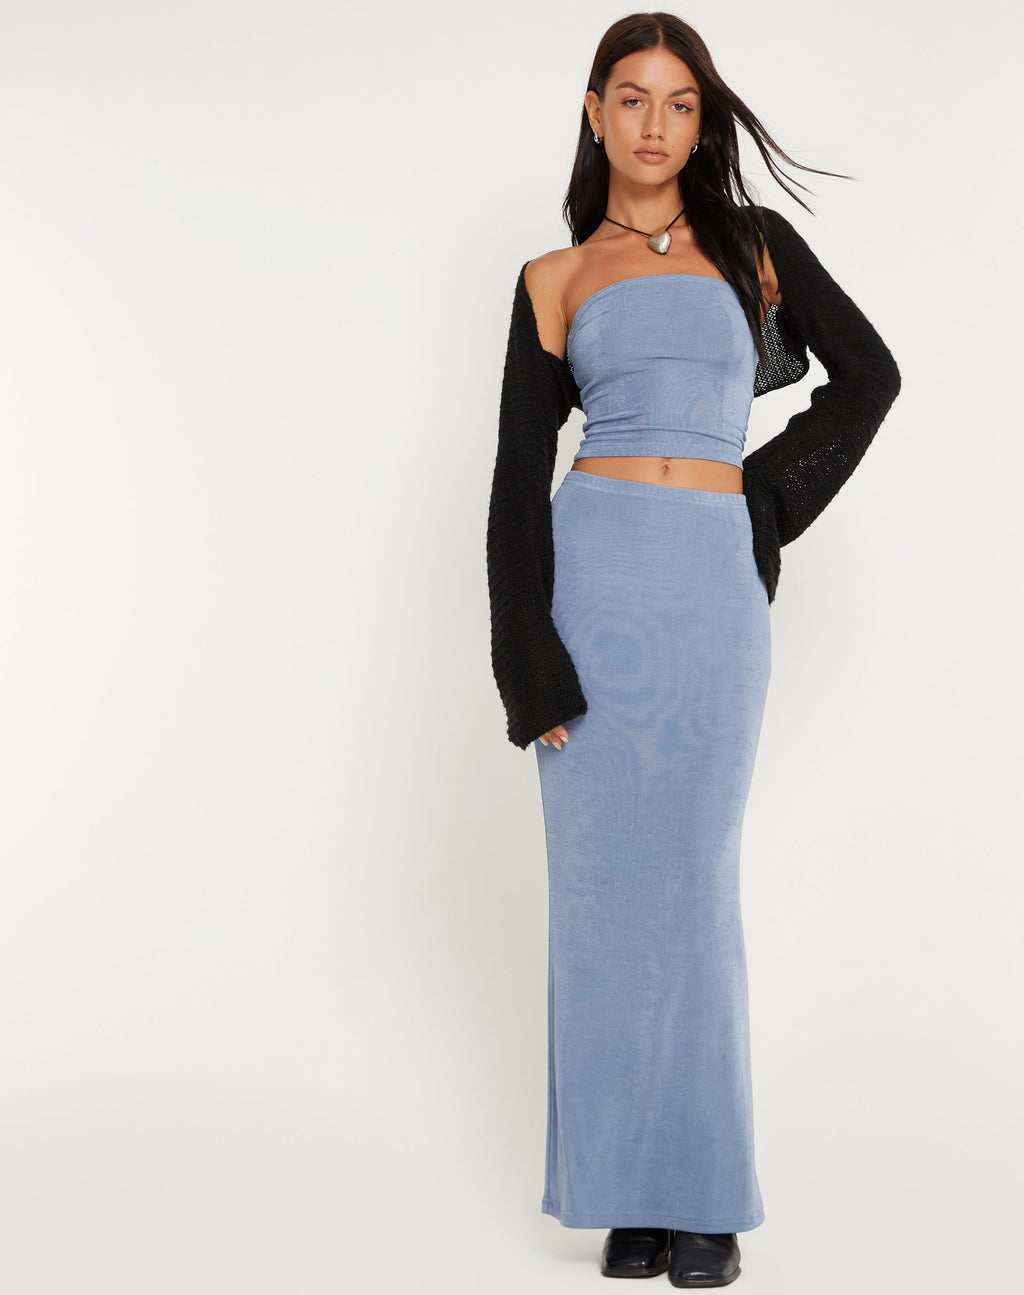 Tulus Low Rise Maxi Skirt in Slate Blue